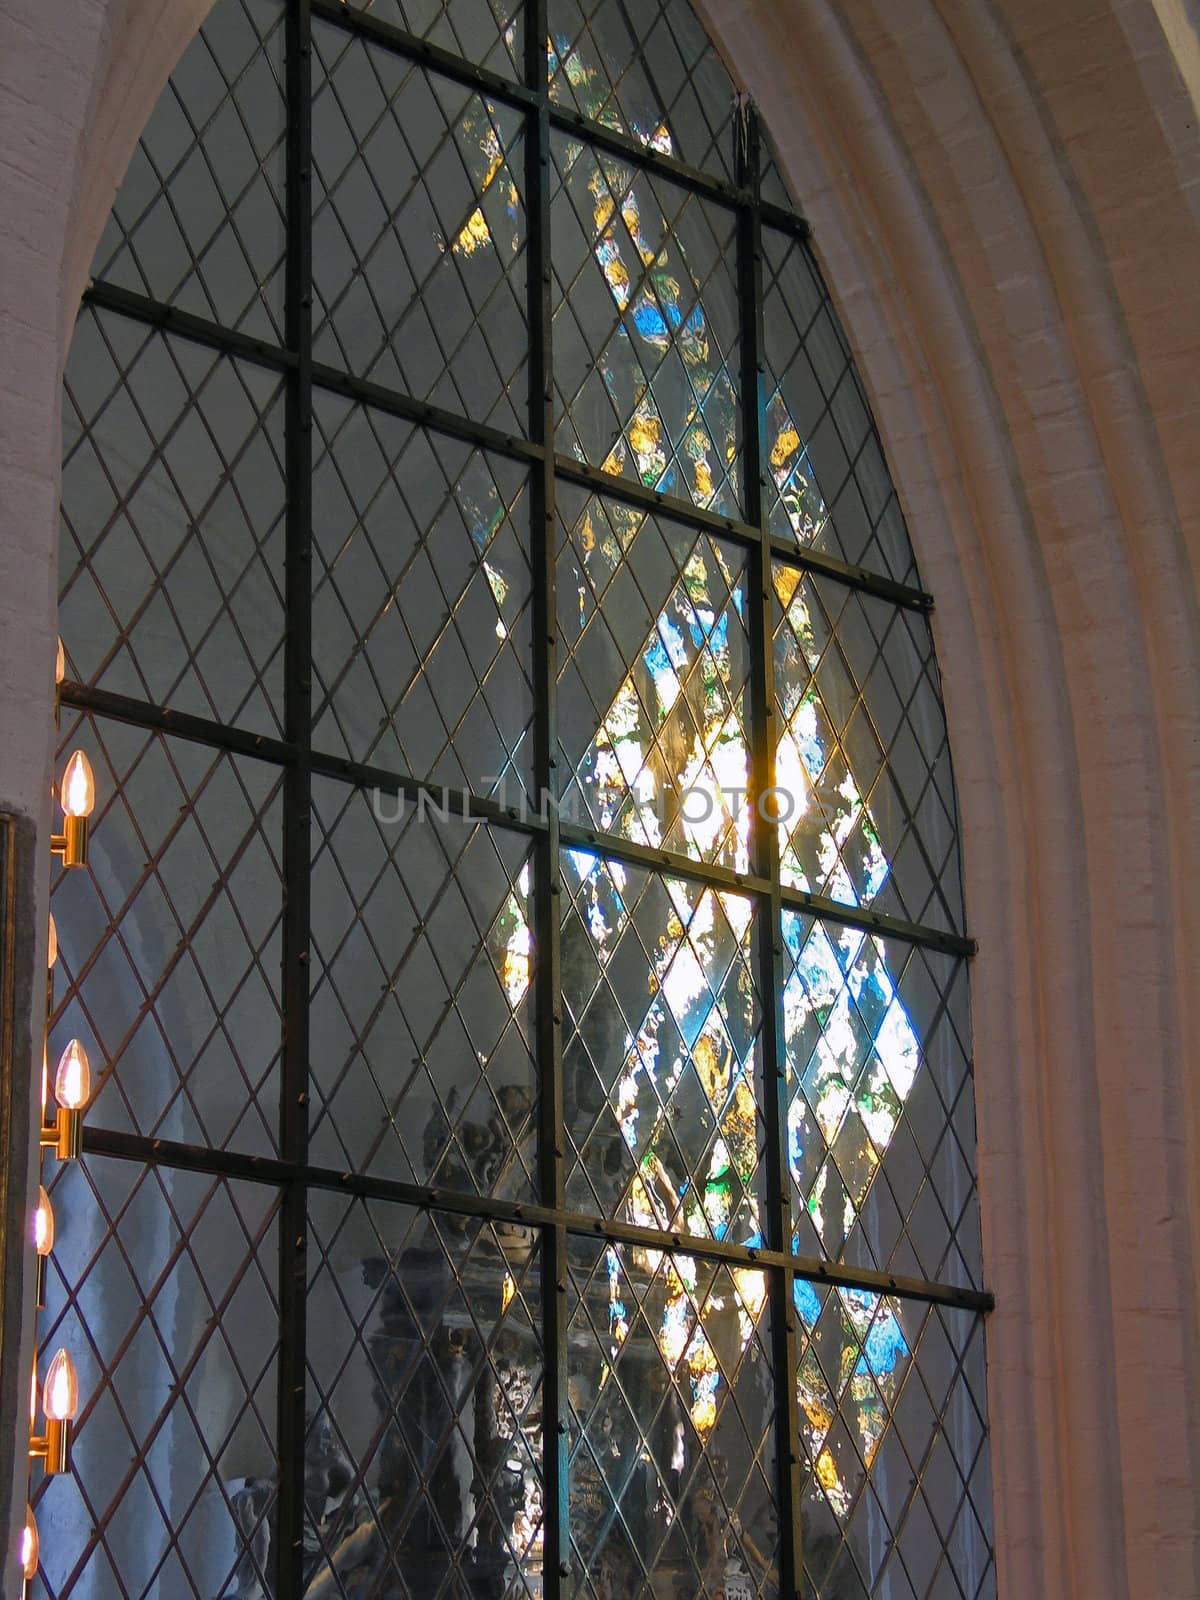 Church Stained Glass Window by Ronyzmbow